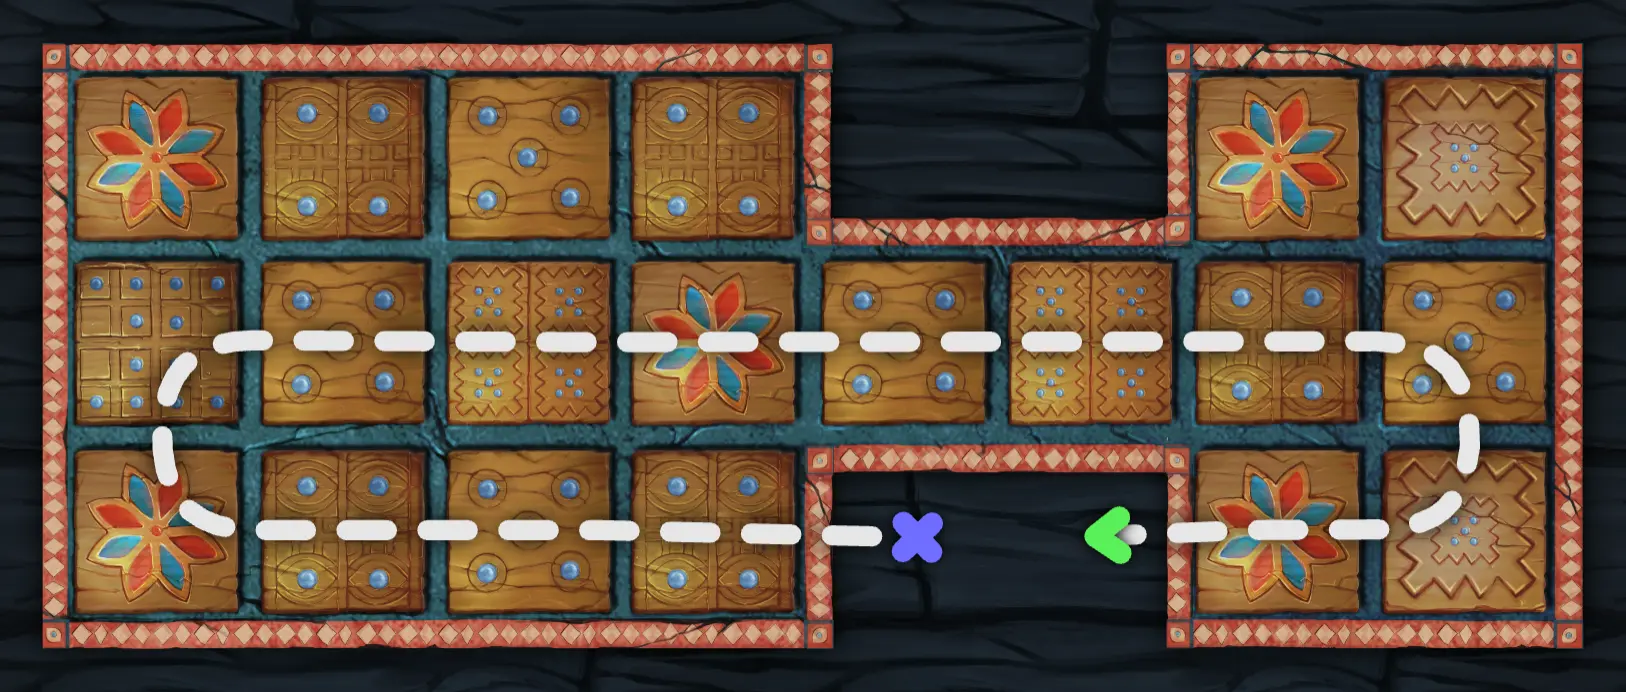 The path that pieces take around the board under the common Finkel rules.